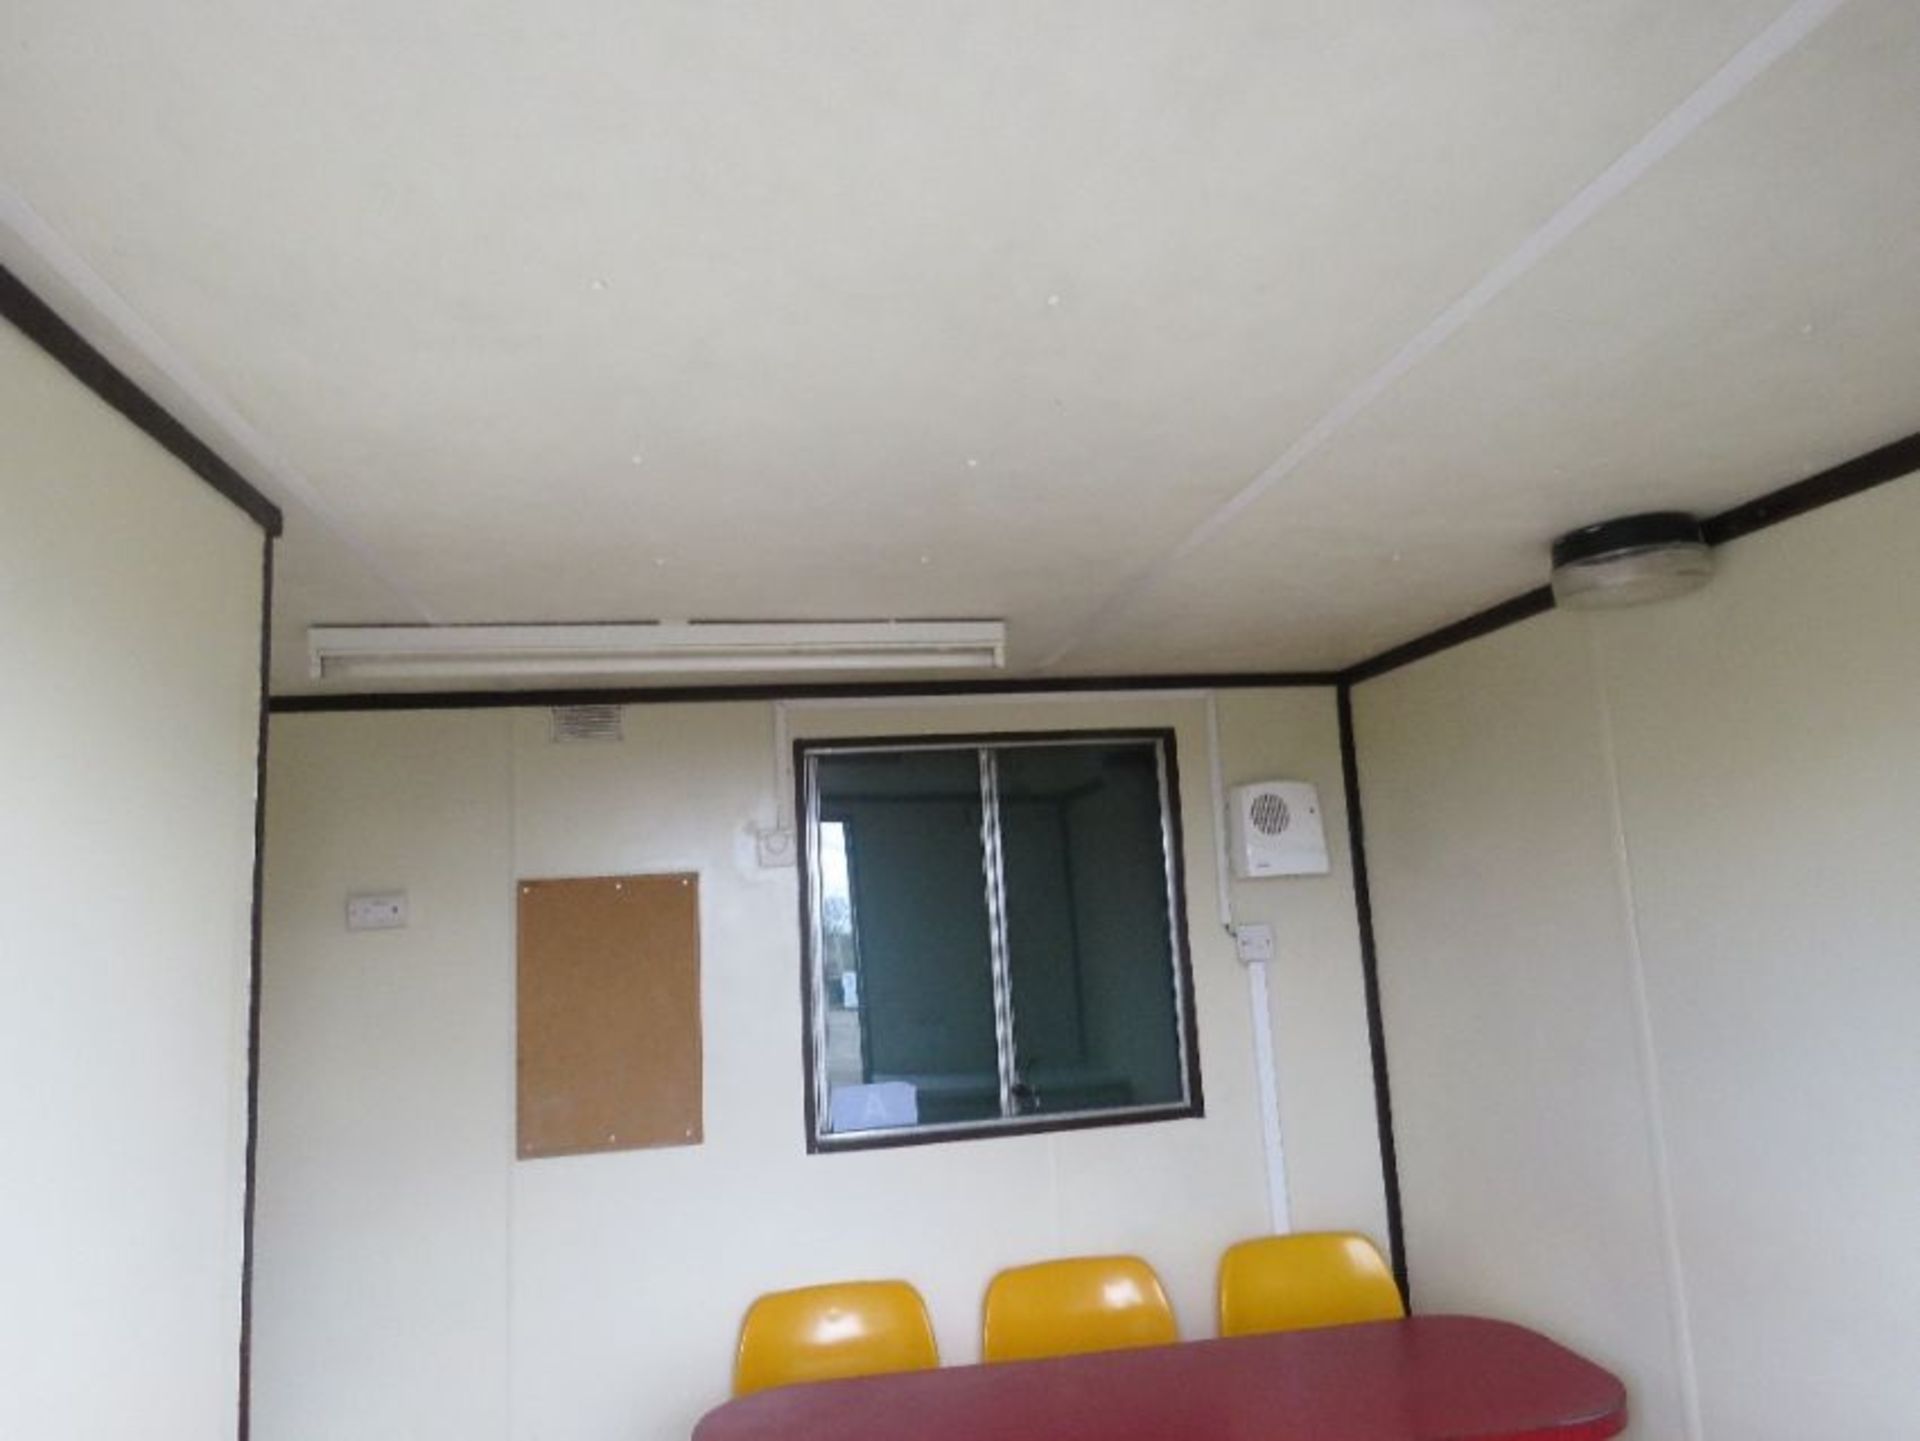 SECURE WELFARE CABIN, 32FT LENGTH X 10FT WIDTH APPROX WITH STEPHILL 10KVA GENERATOR - Image 10 of 18